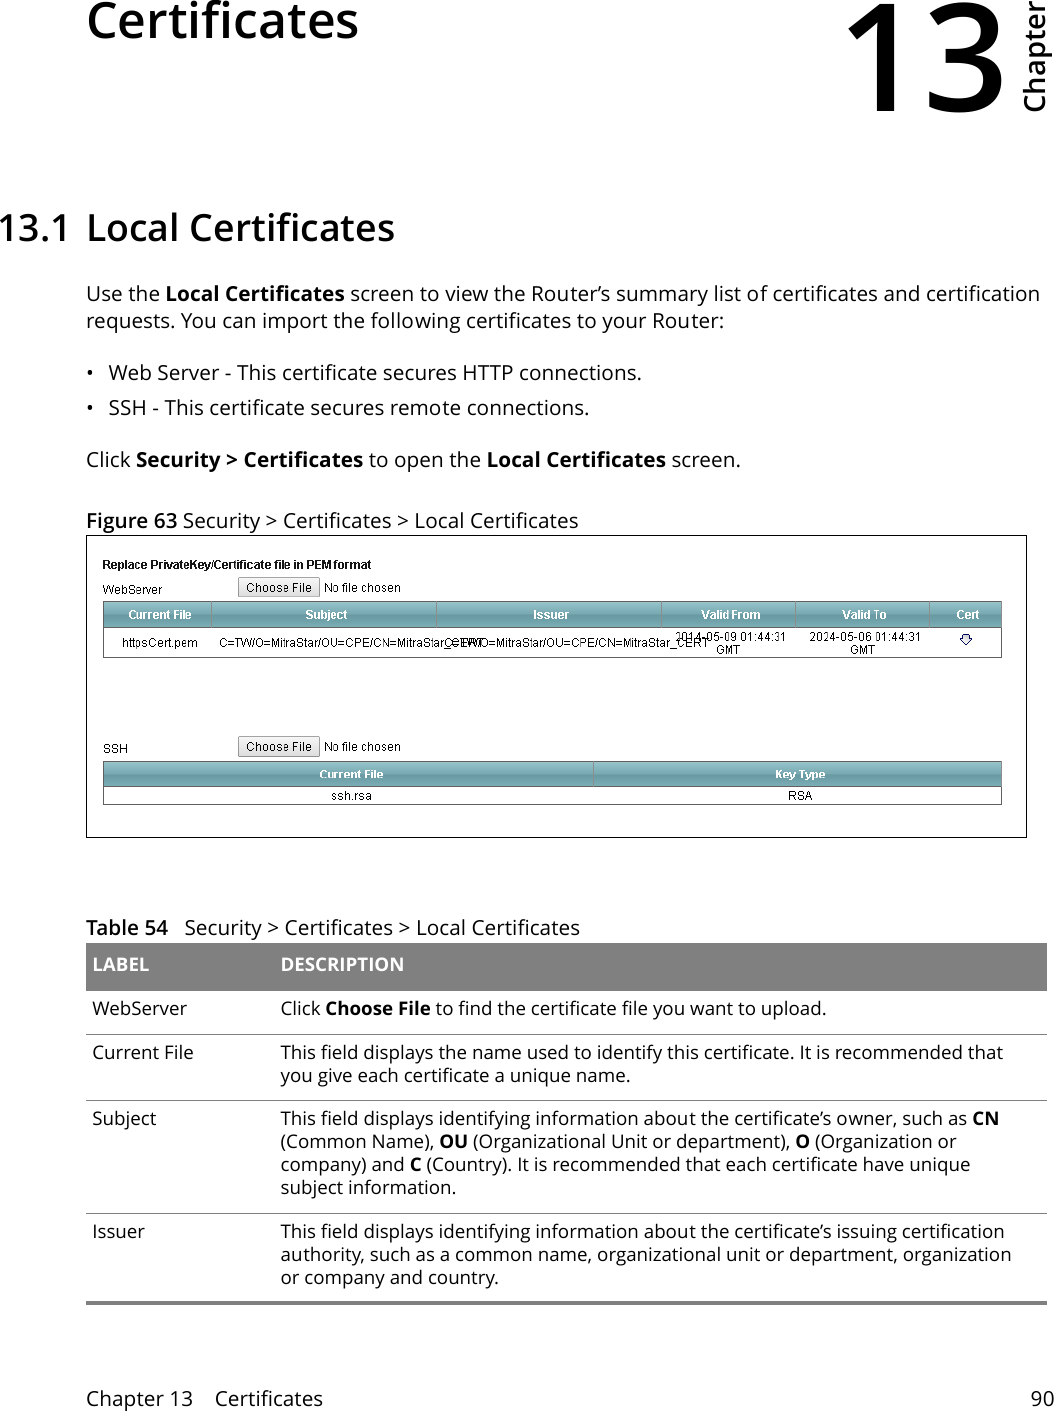 13Chapter Chapter 13    Certificates 90CHAPTER 13 Chapter 13 Certificates13.1 Local CertificatesUse the Local Certificates screen to view the Router’s summary list of certificates and certification requests. You can import the following certificates to your Router:• Web Server - This certificate secures HTTP connections.• SSH - This certificate secures remote connections.Click Security &gt; Certificates to open the Local Certificates screen. Figure 63 Security &gt; Certificates &gt; Local Certificates   Table 54   Security &gt; Certificates &gt; Local Certificates LABEL DESCRIPTIONWebServer  Click Choose File to find the certificate file you want to upload. Current File This field displays the name used to identify this certificate. It is recommended that you give each certificate a unique name. Subject This field displays identifying information about the certificate’s owner, such as CN (Common Name), OU (Organizational Unit or department), O (Organization or company) and C (Country). It is recommended that each certificate have unique subject information. Issuer This field displays identifying information about the certificate’s issuing certification authority, such as a common name, organizational unit or department, organization or company and country.